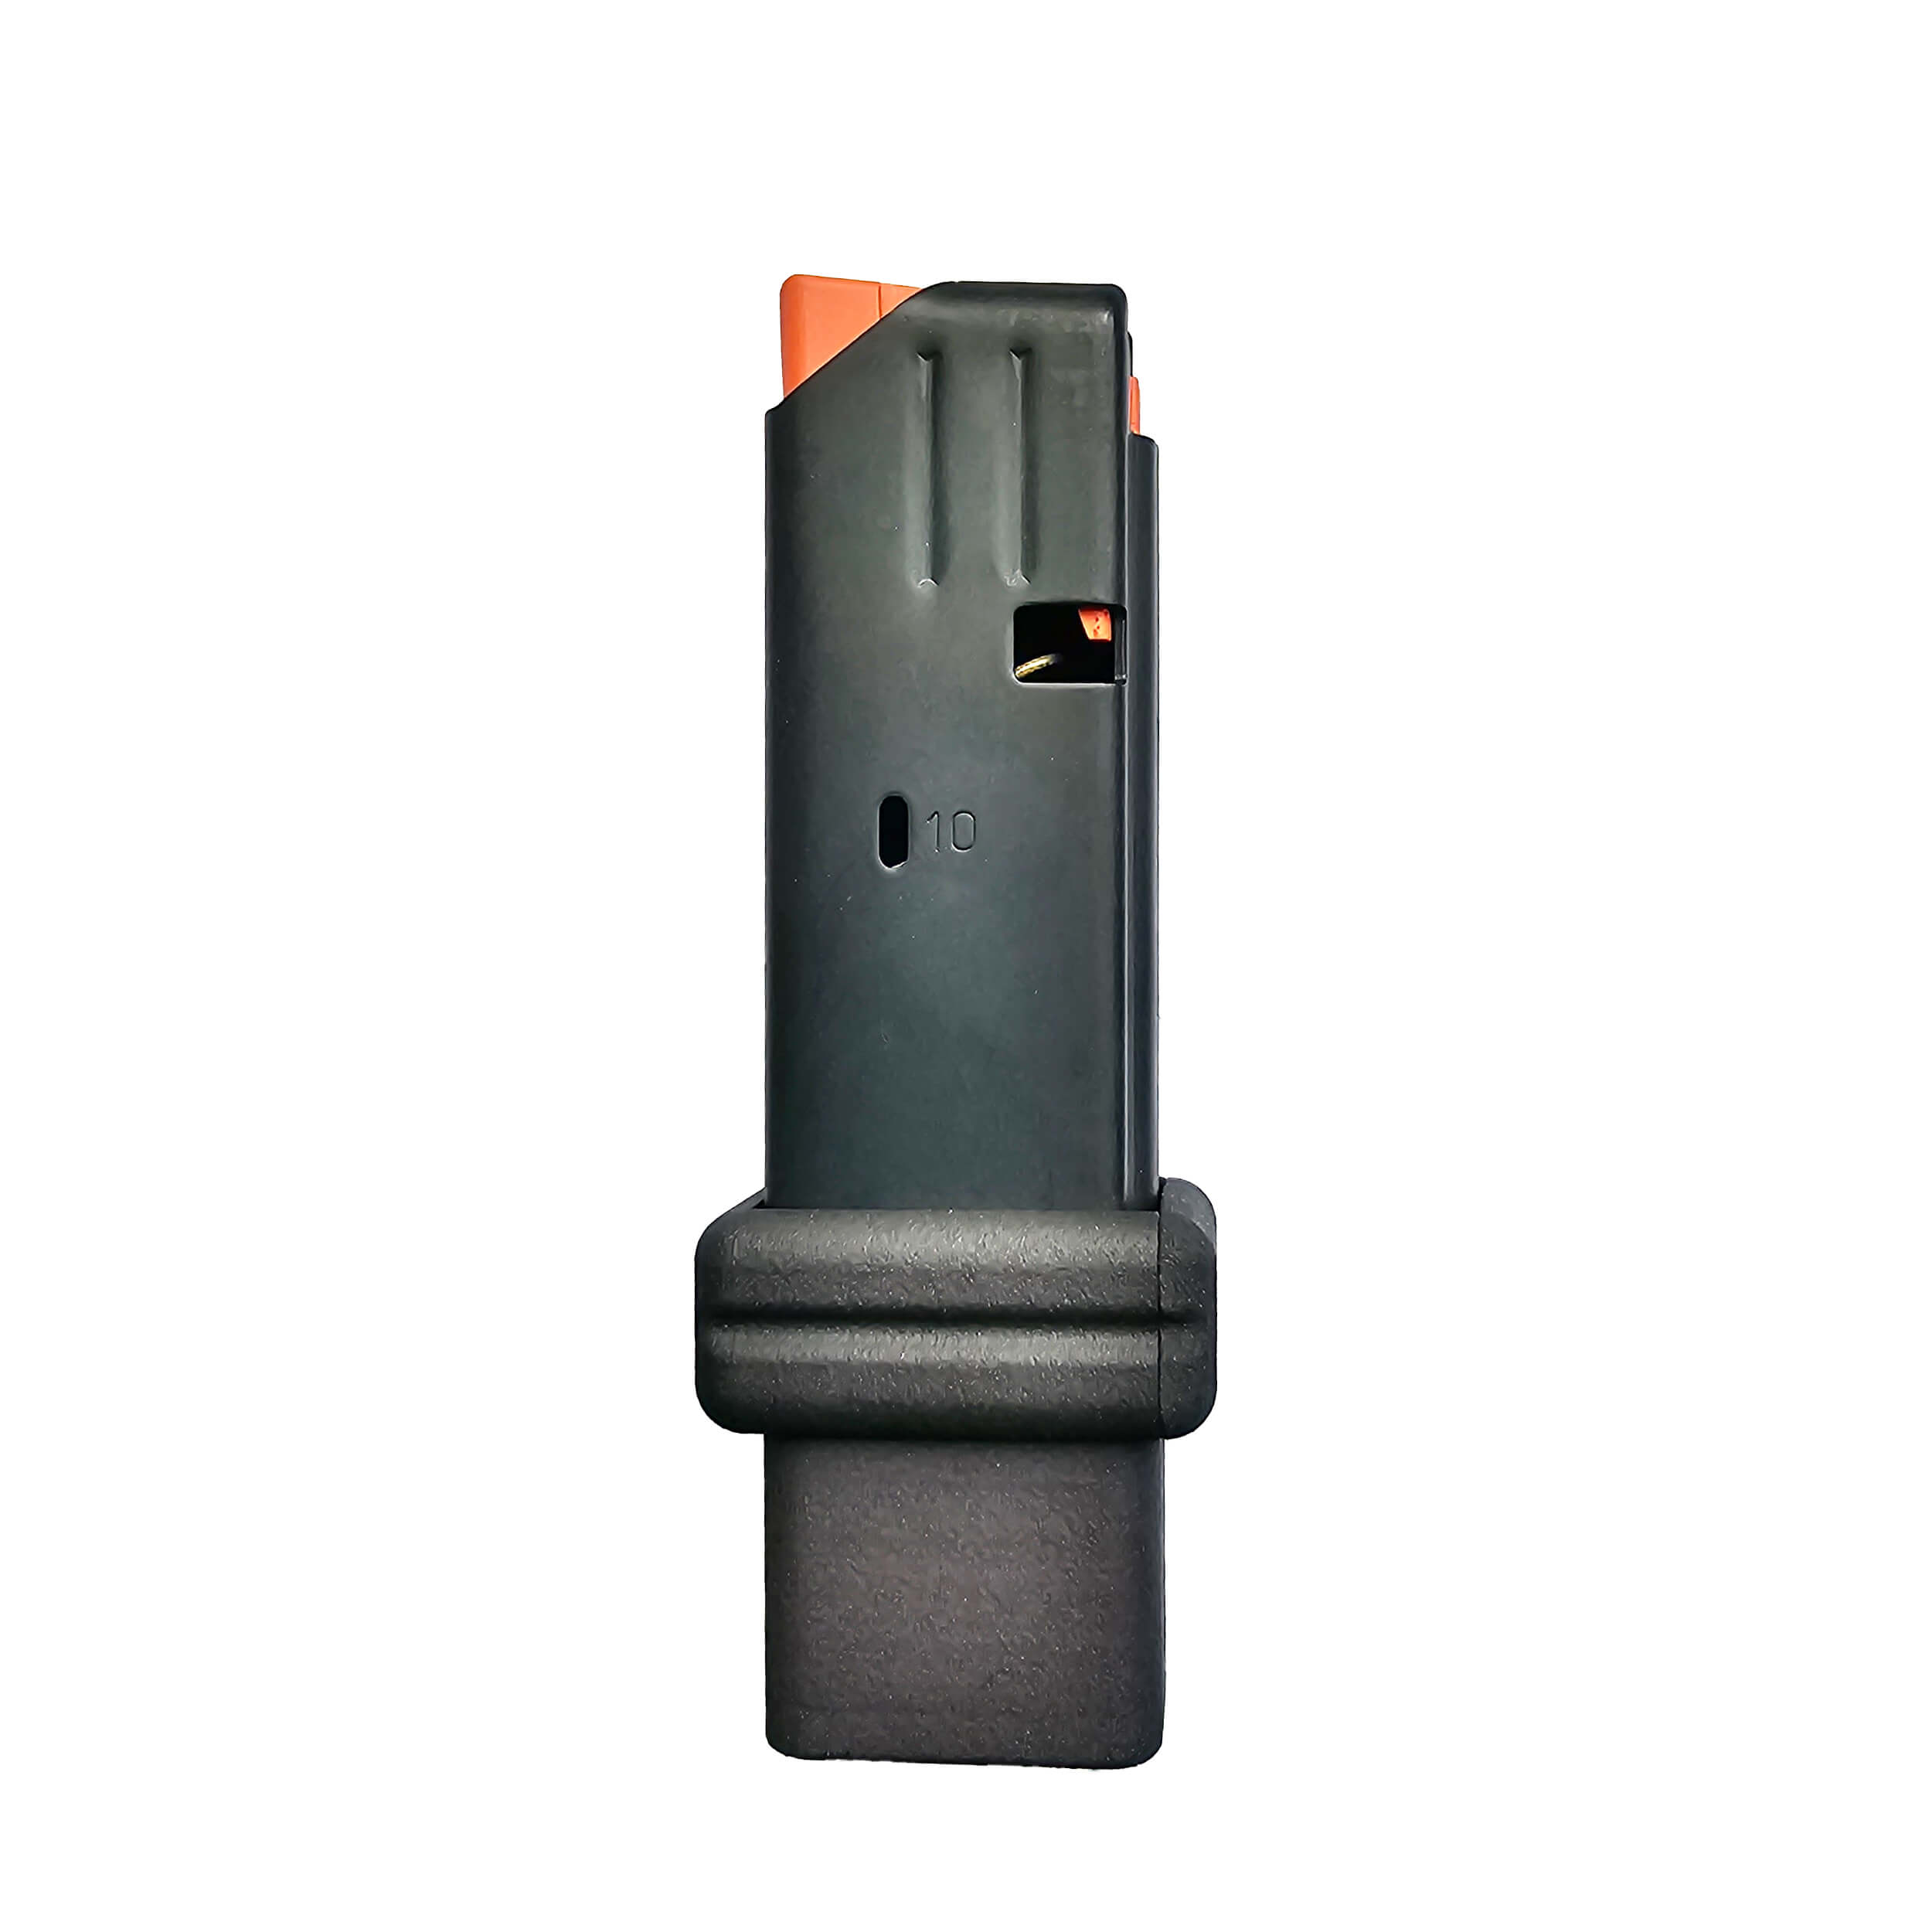 ISSProtectiontrade Magazine coupler grip with 1x Colt Magazin from DURAMAG USA 